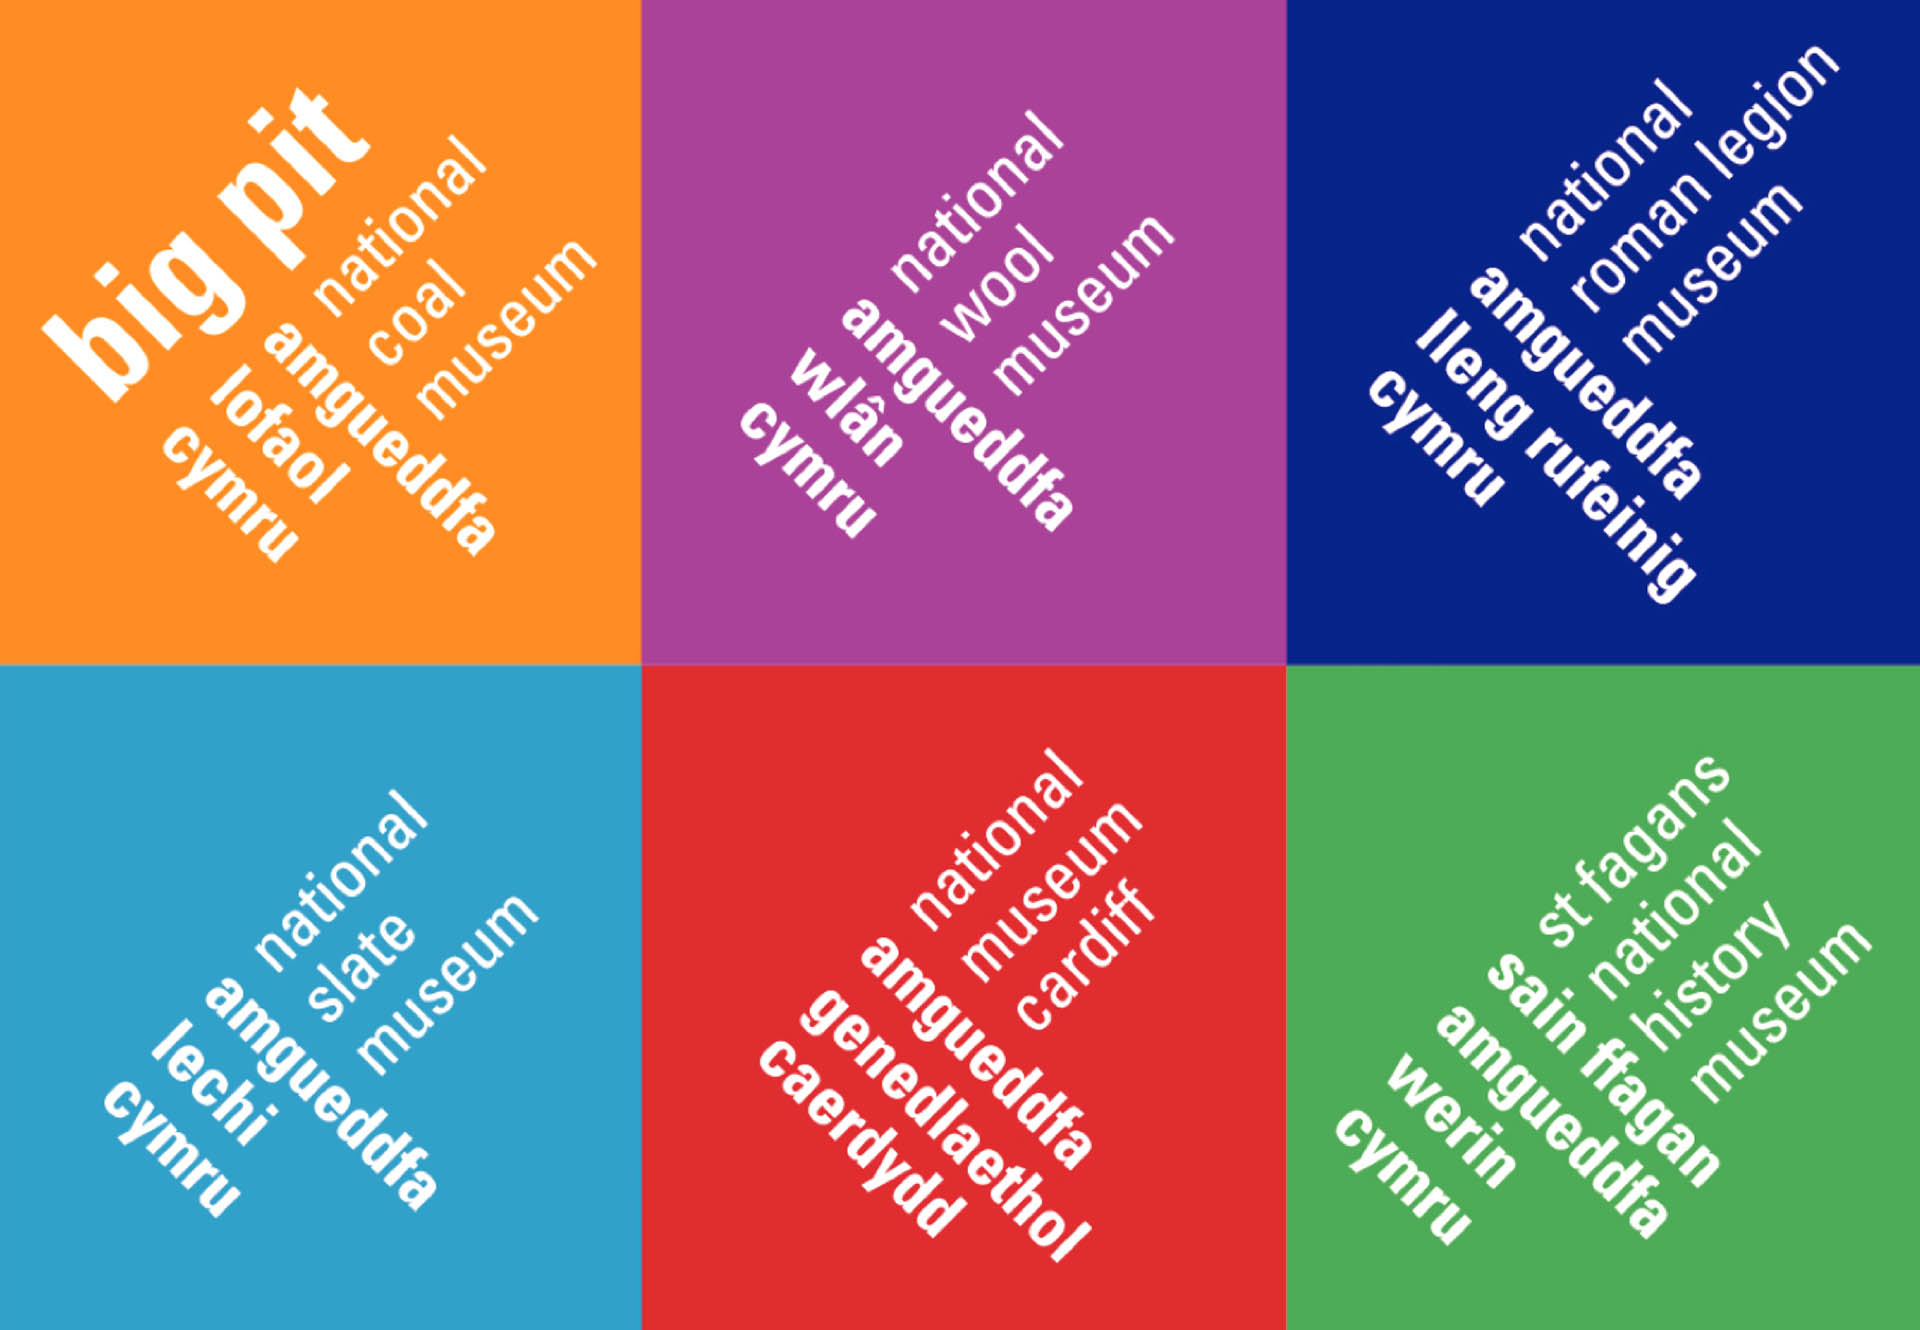 Visual identity for the National Museum Wales